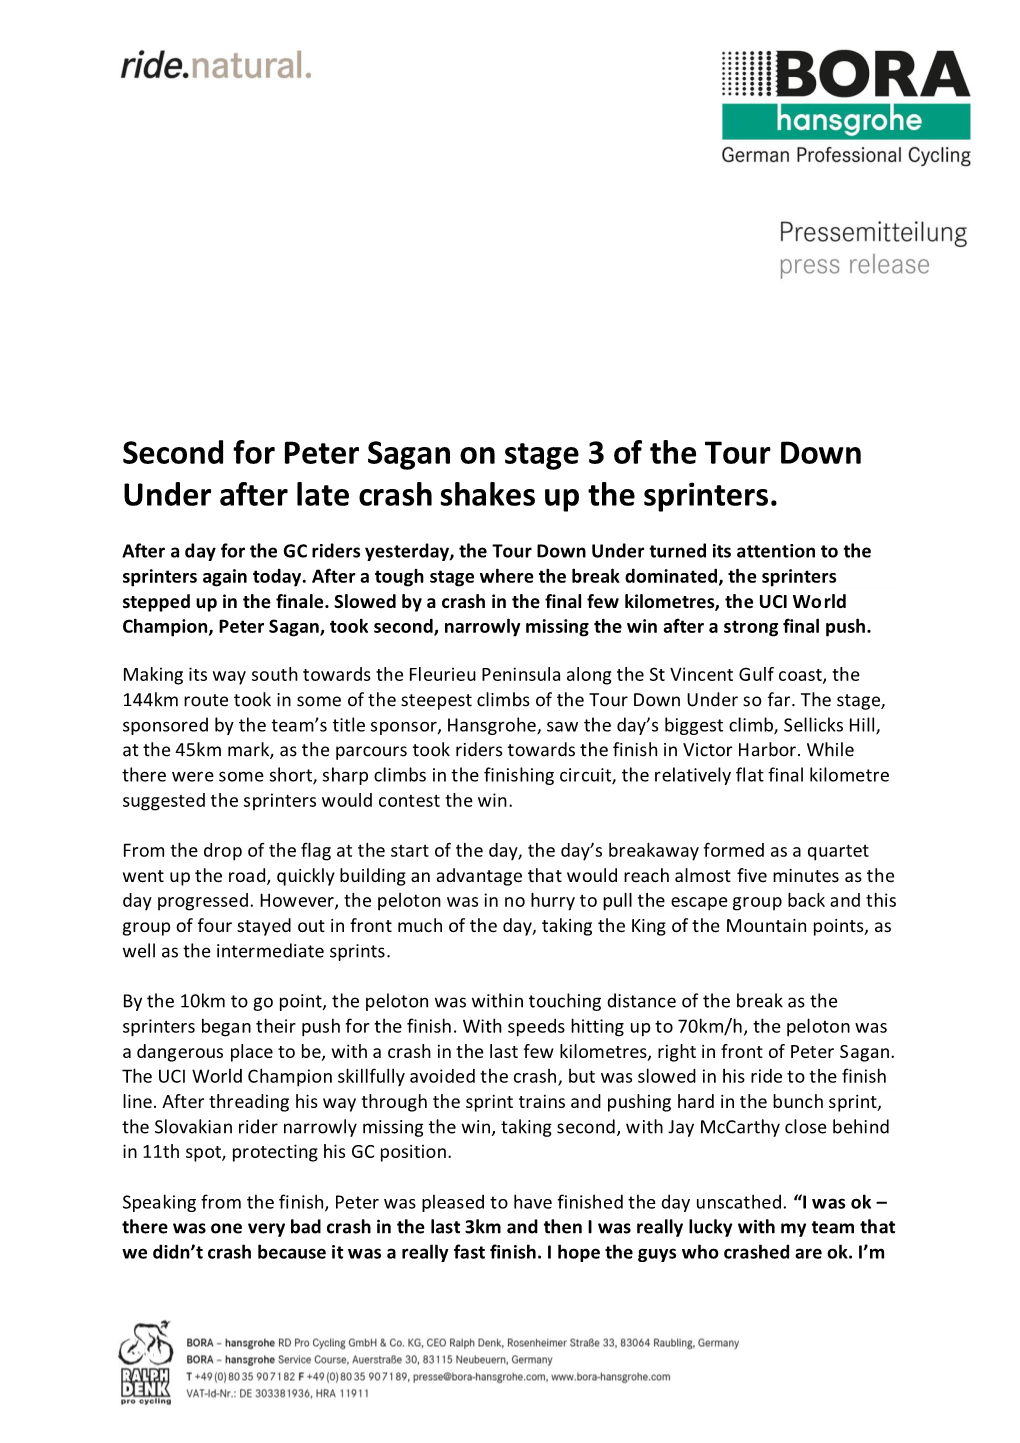 Second for Peter Sagan on Stage 3 of the Tour Down Under After Late Crash Shakes up the Sprinters